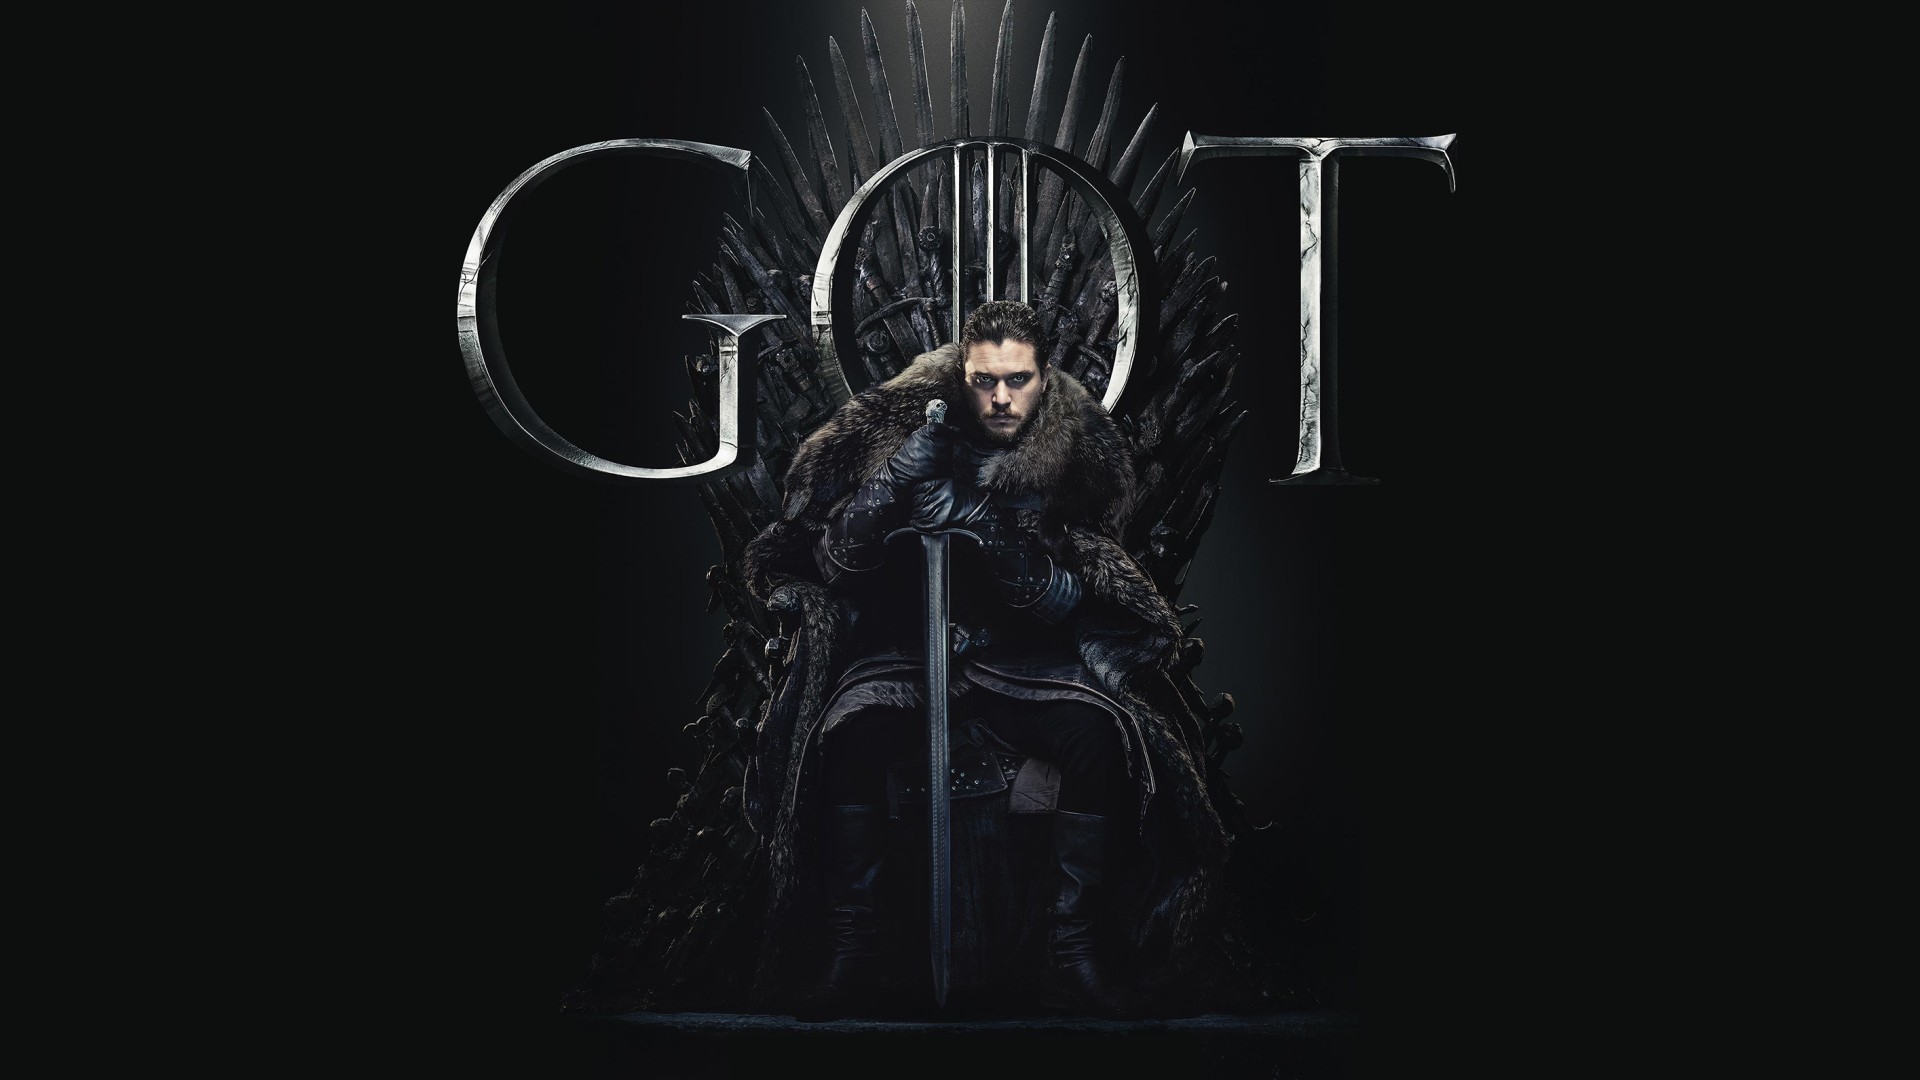 Game of Thrones 8 Season Movie Wallpaper with high-resolution 1920x1080 pixel. You can use this poster wallpaper for your Desktop Computers, Mac Screensavers, Windows Backgrounds, iPhone Wallpapers, Tablet or Android Lock screen and another Mobile device